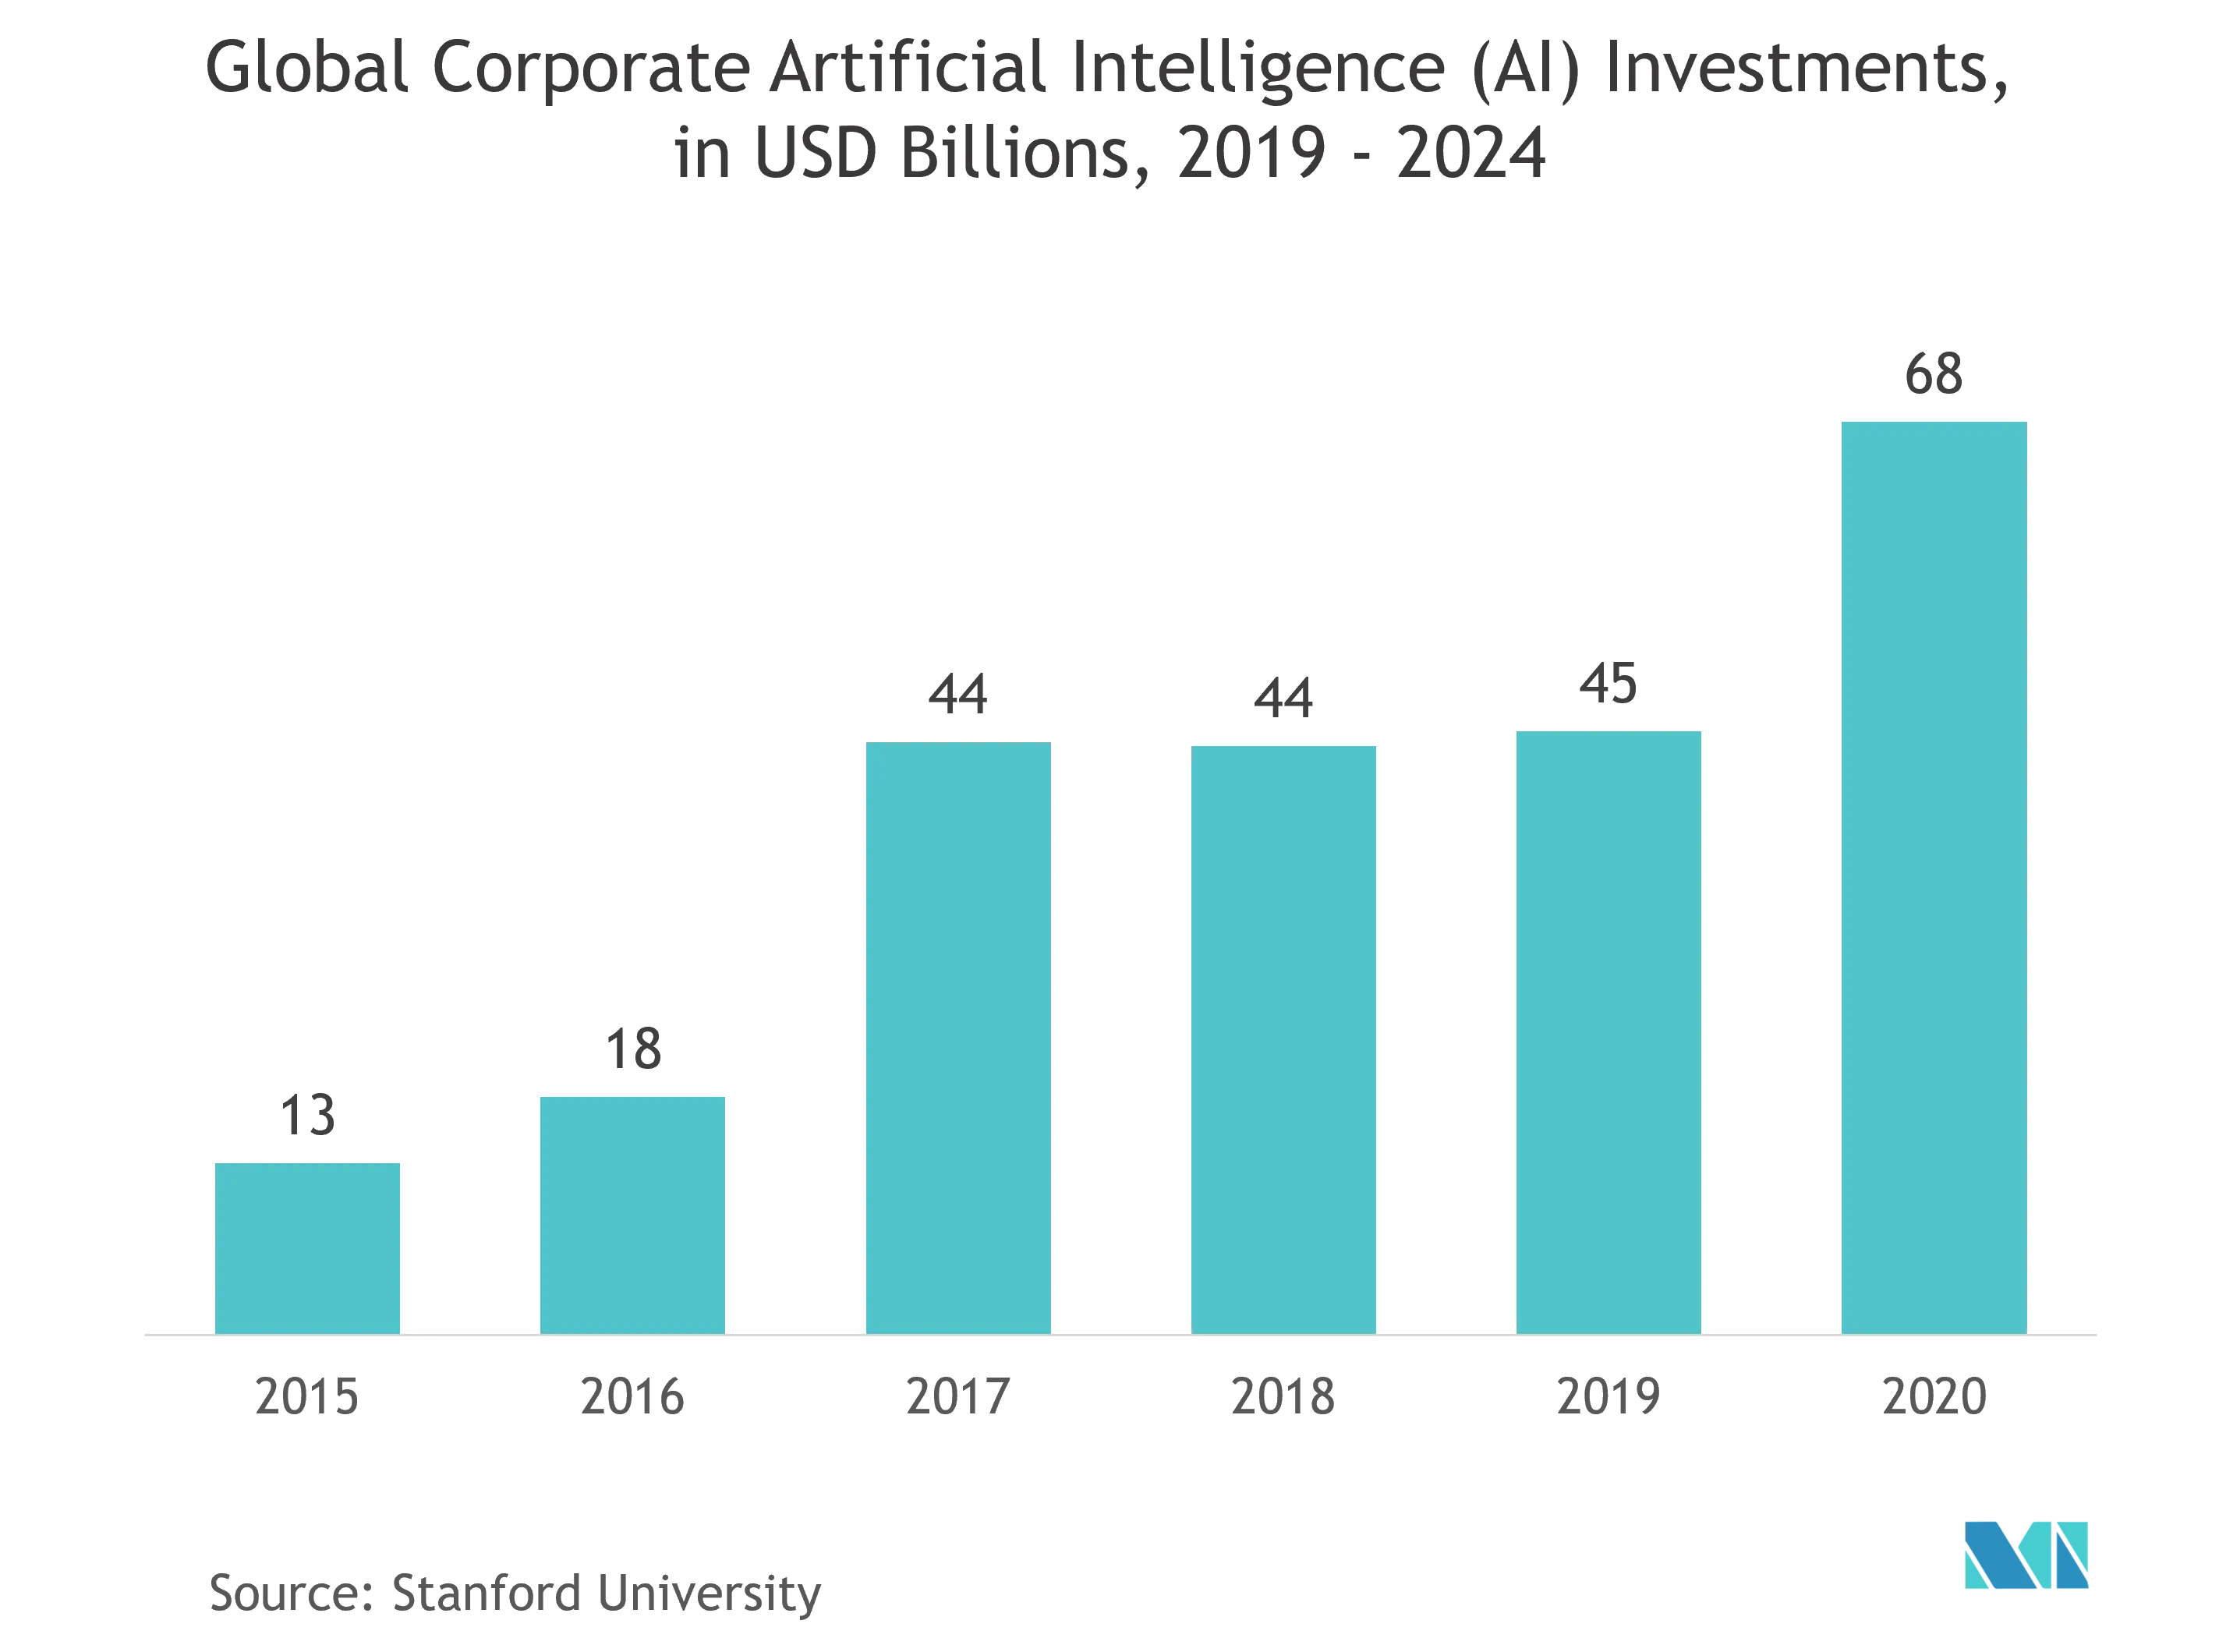 Global Corporate Artificial Intelligence (AI) Investments, in USD Billions, 2019 - 2024 